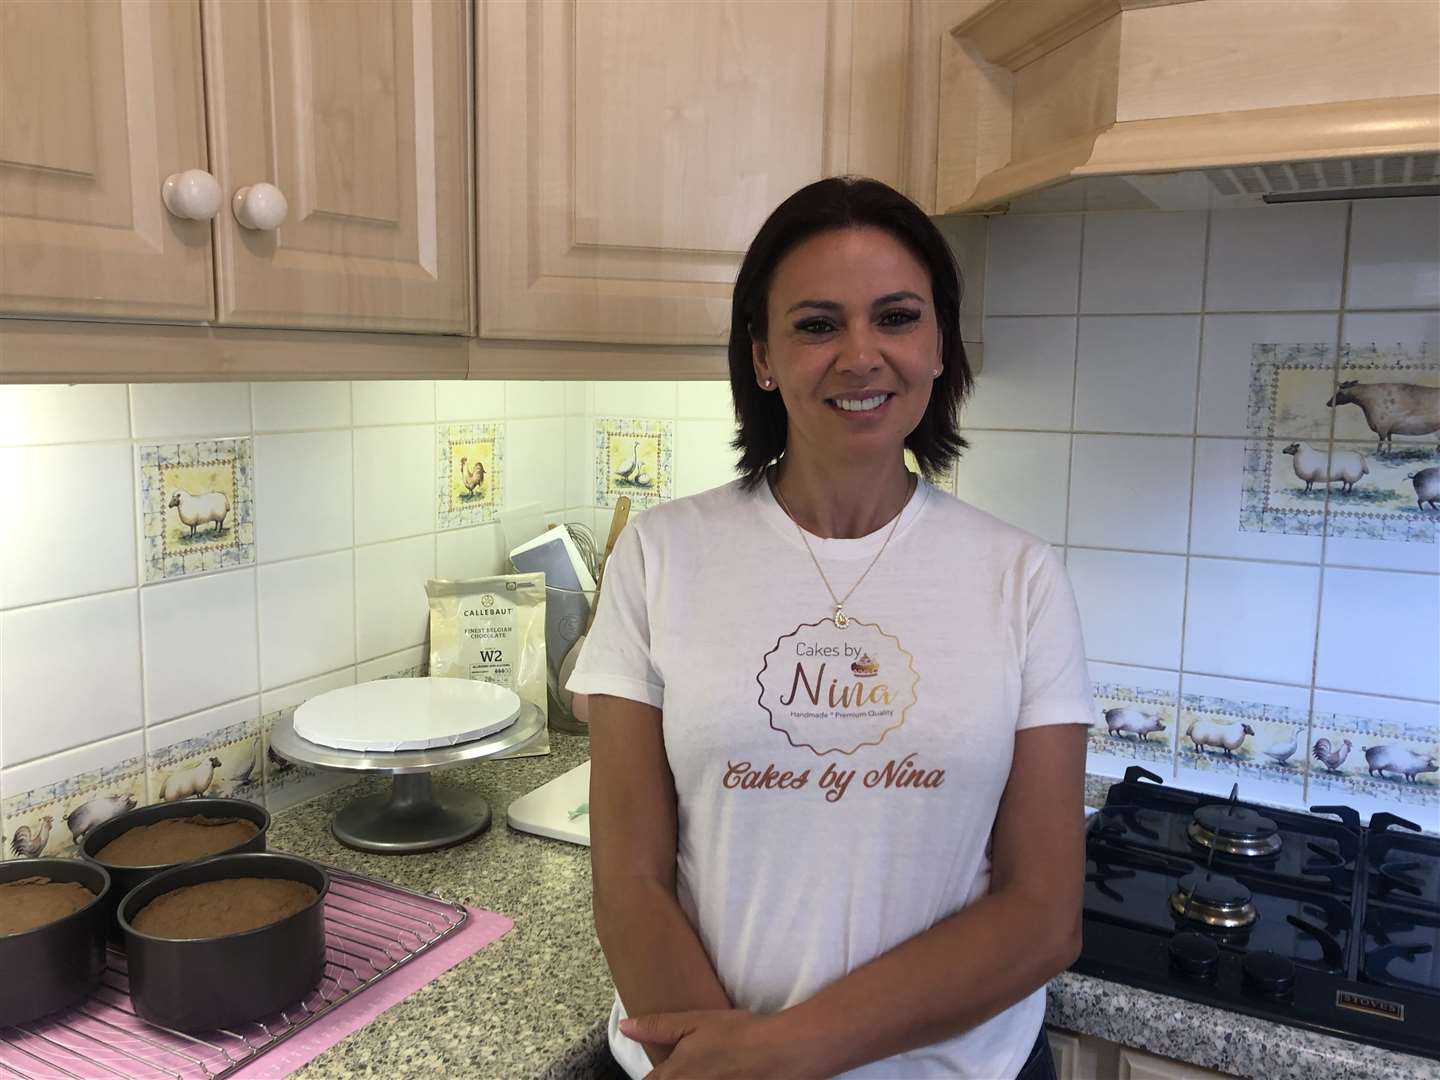 Nina has her own cake making business run out of her home in Gravesend